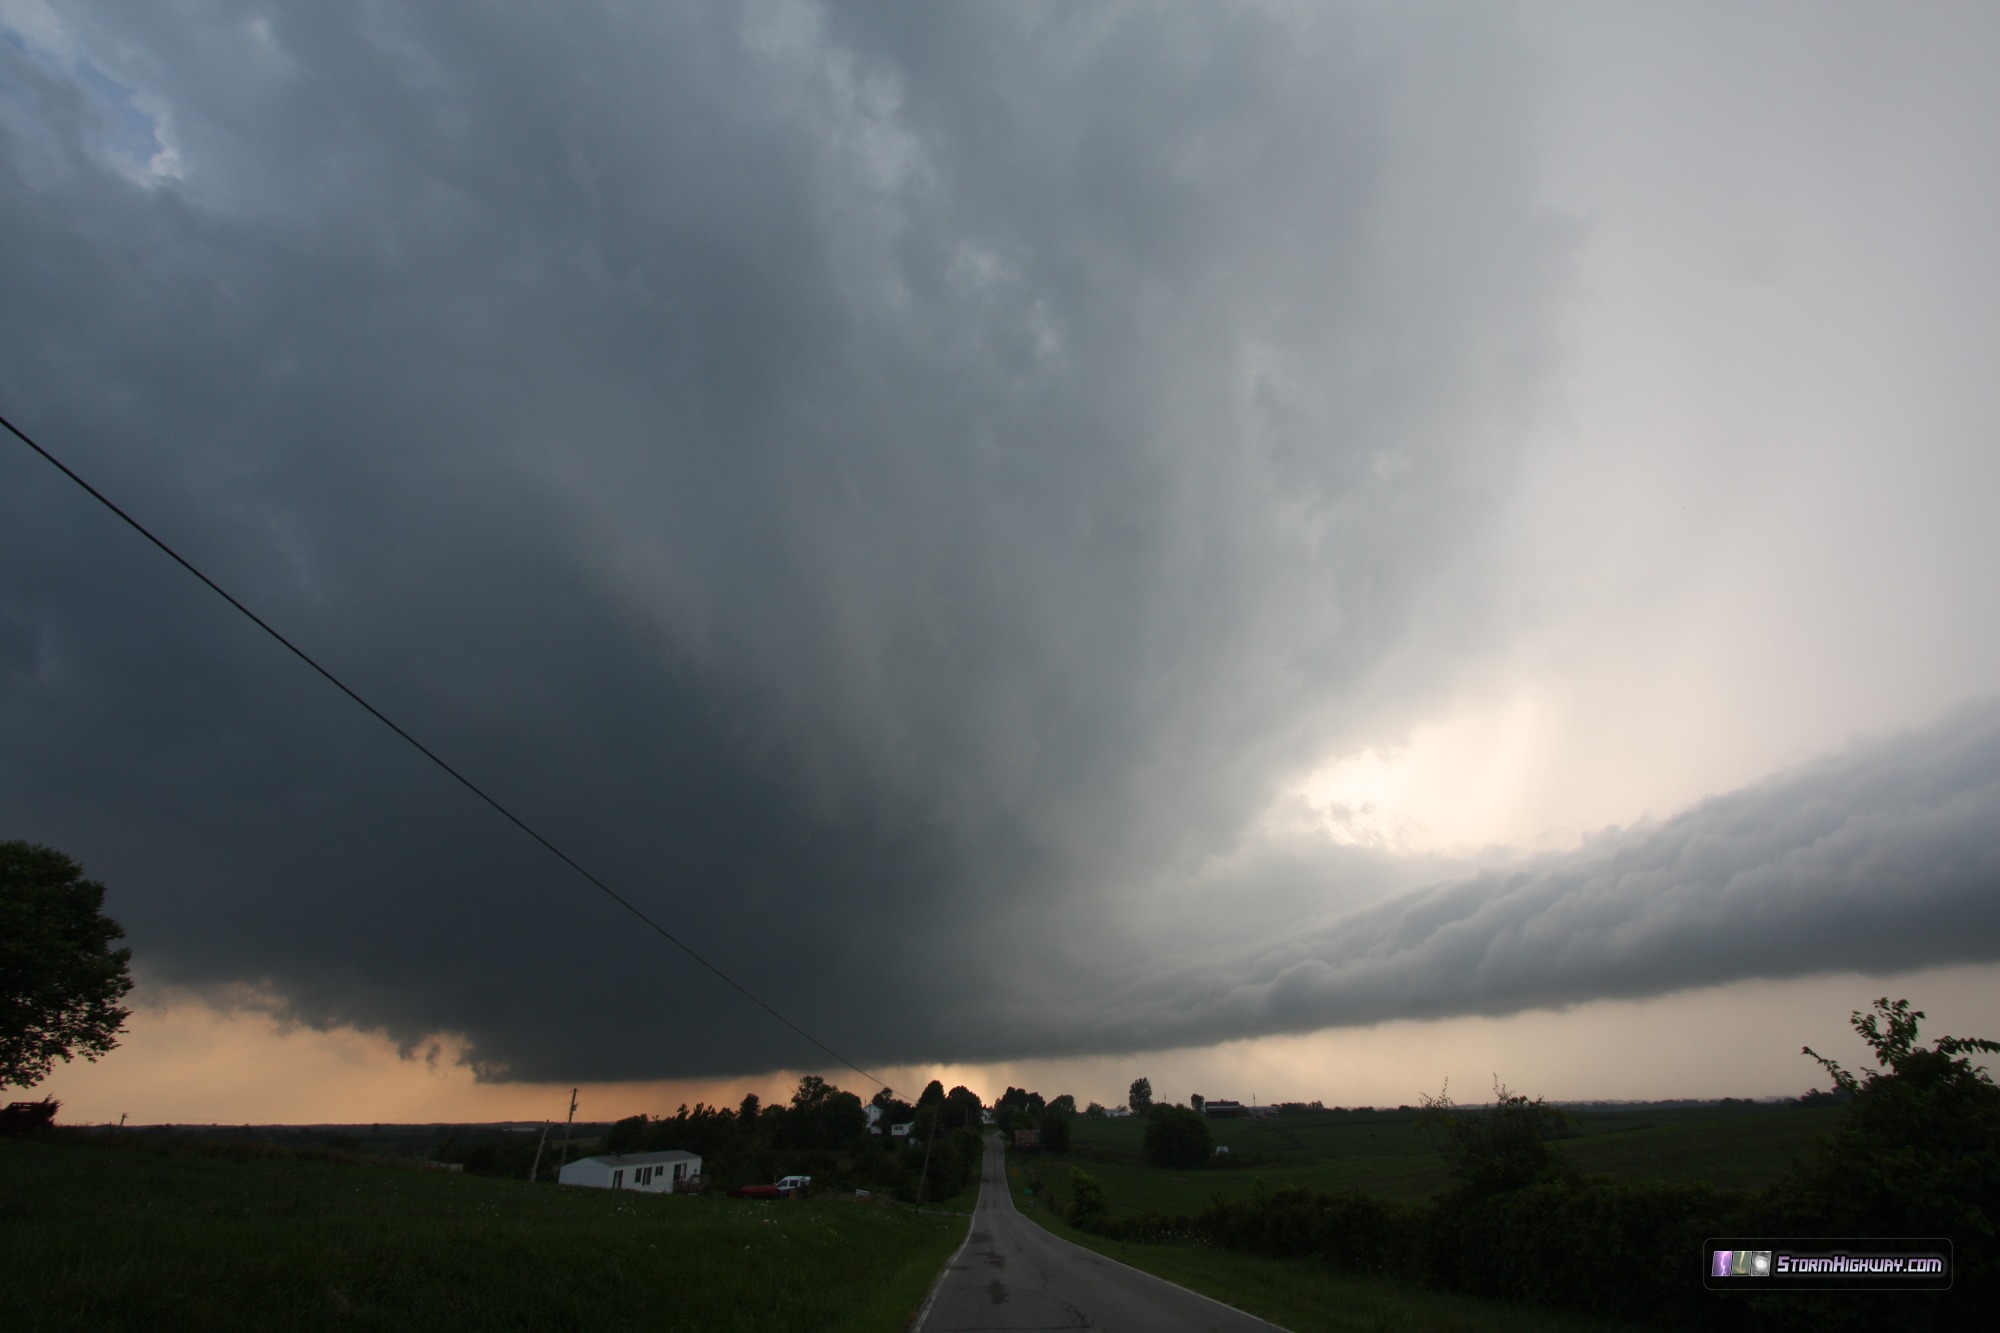 Supercell at Hill Top, Kentucky - July 27, 2014